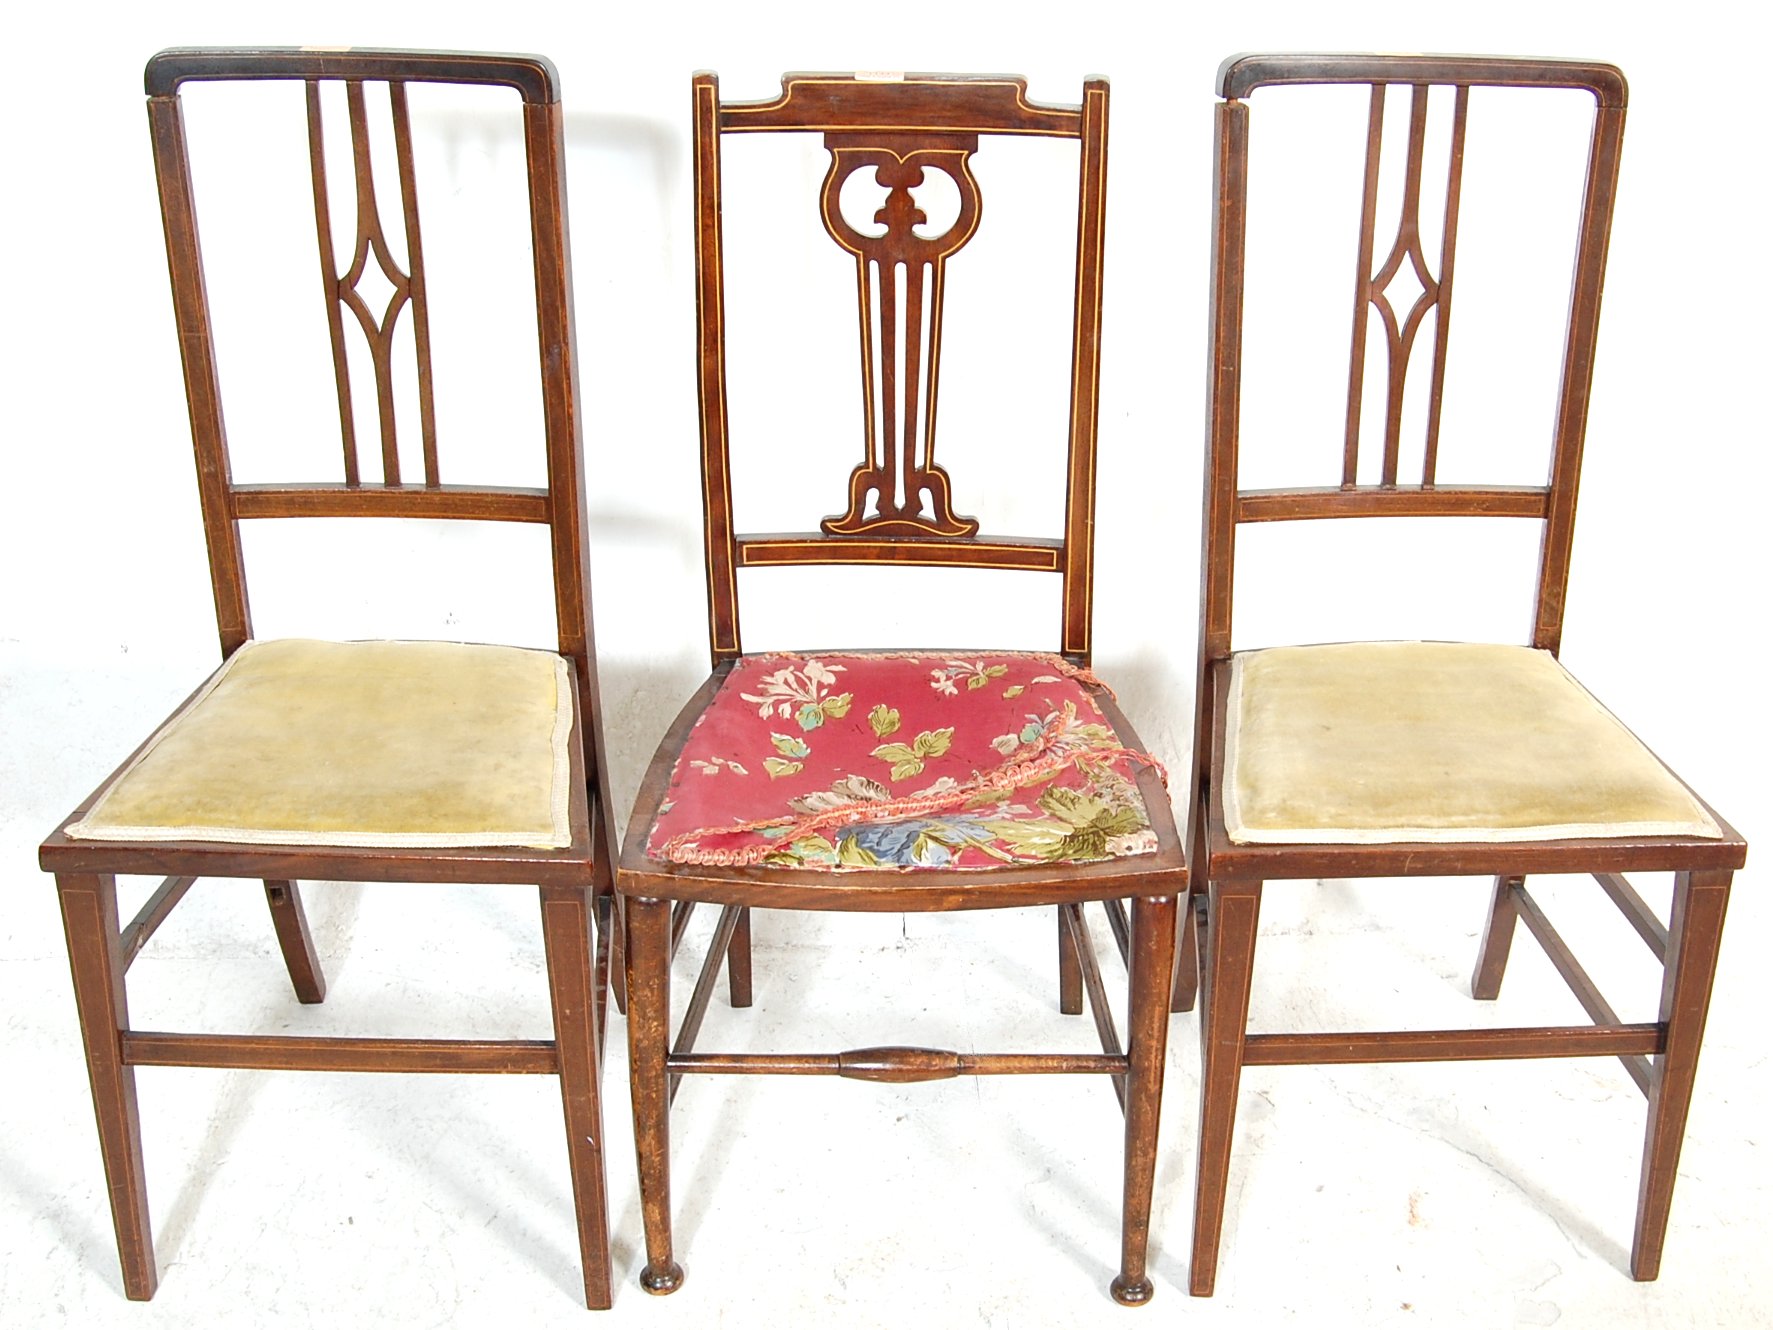 THREE EARLY 20TH CENTURY EDWARDIAN BEDROOM CHAIRS. - Image 3 of 4